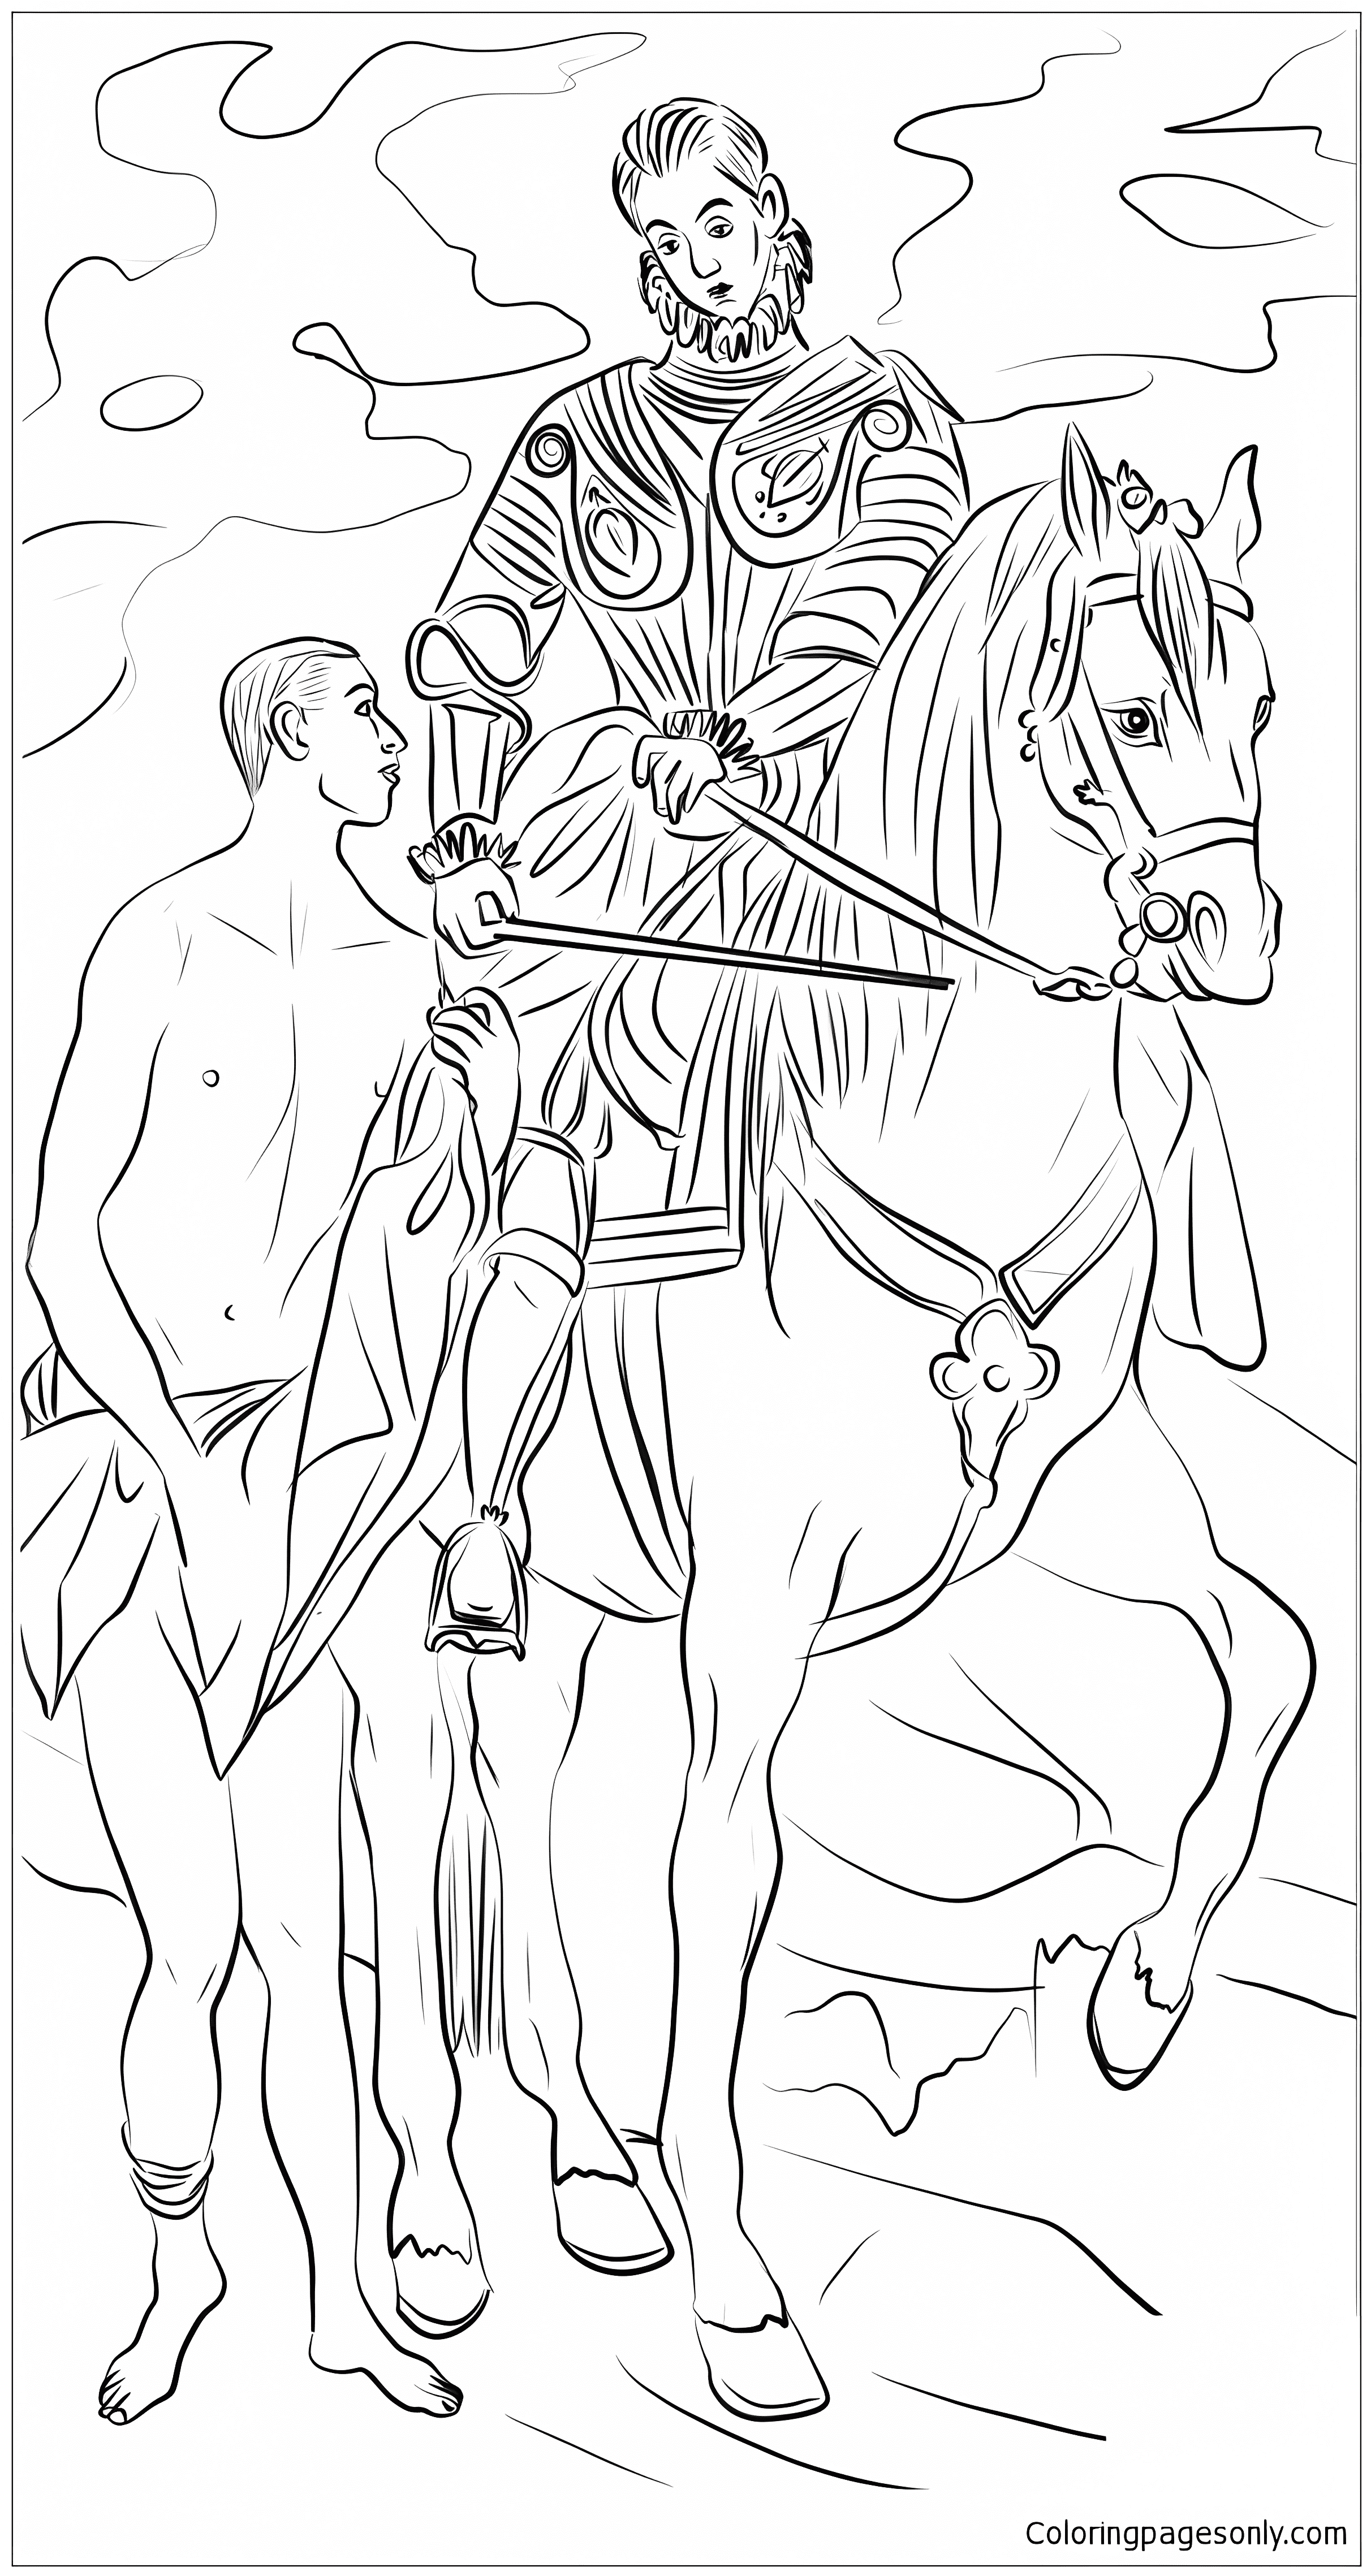 Saint Martin of Tours Coloring Pages